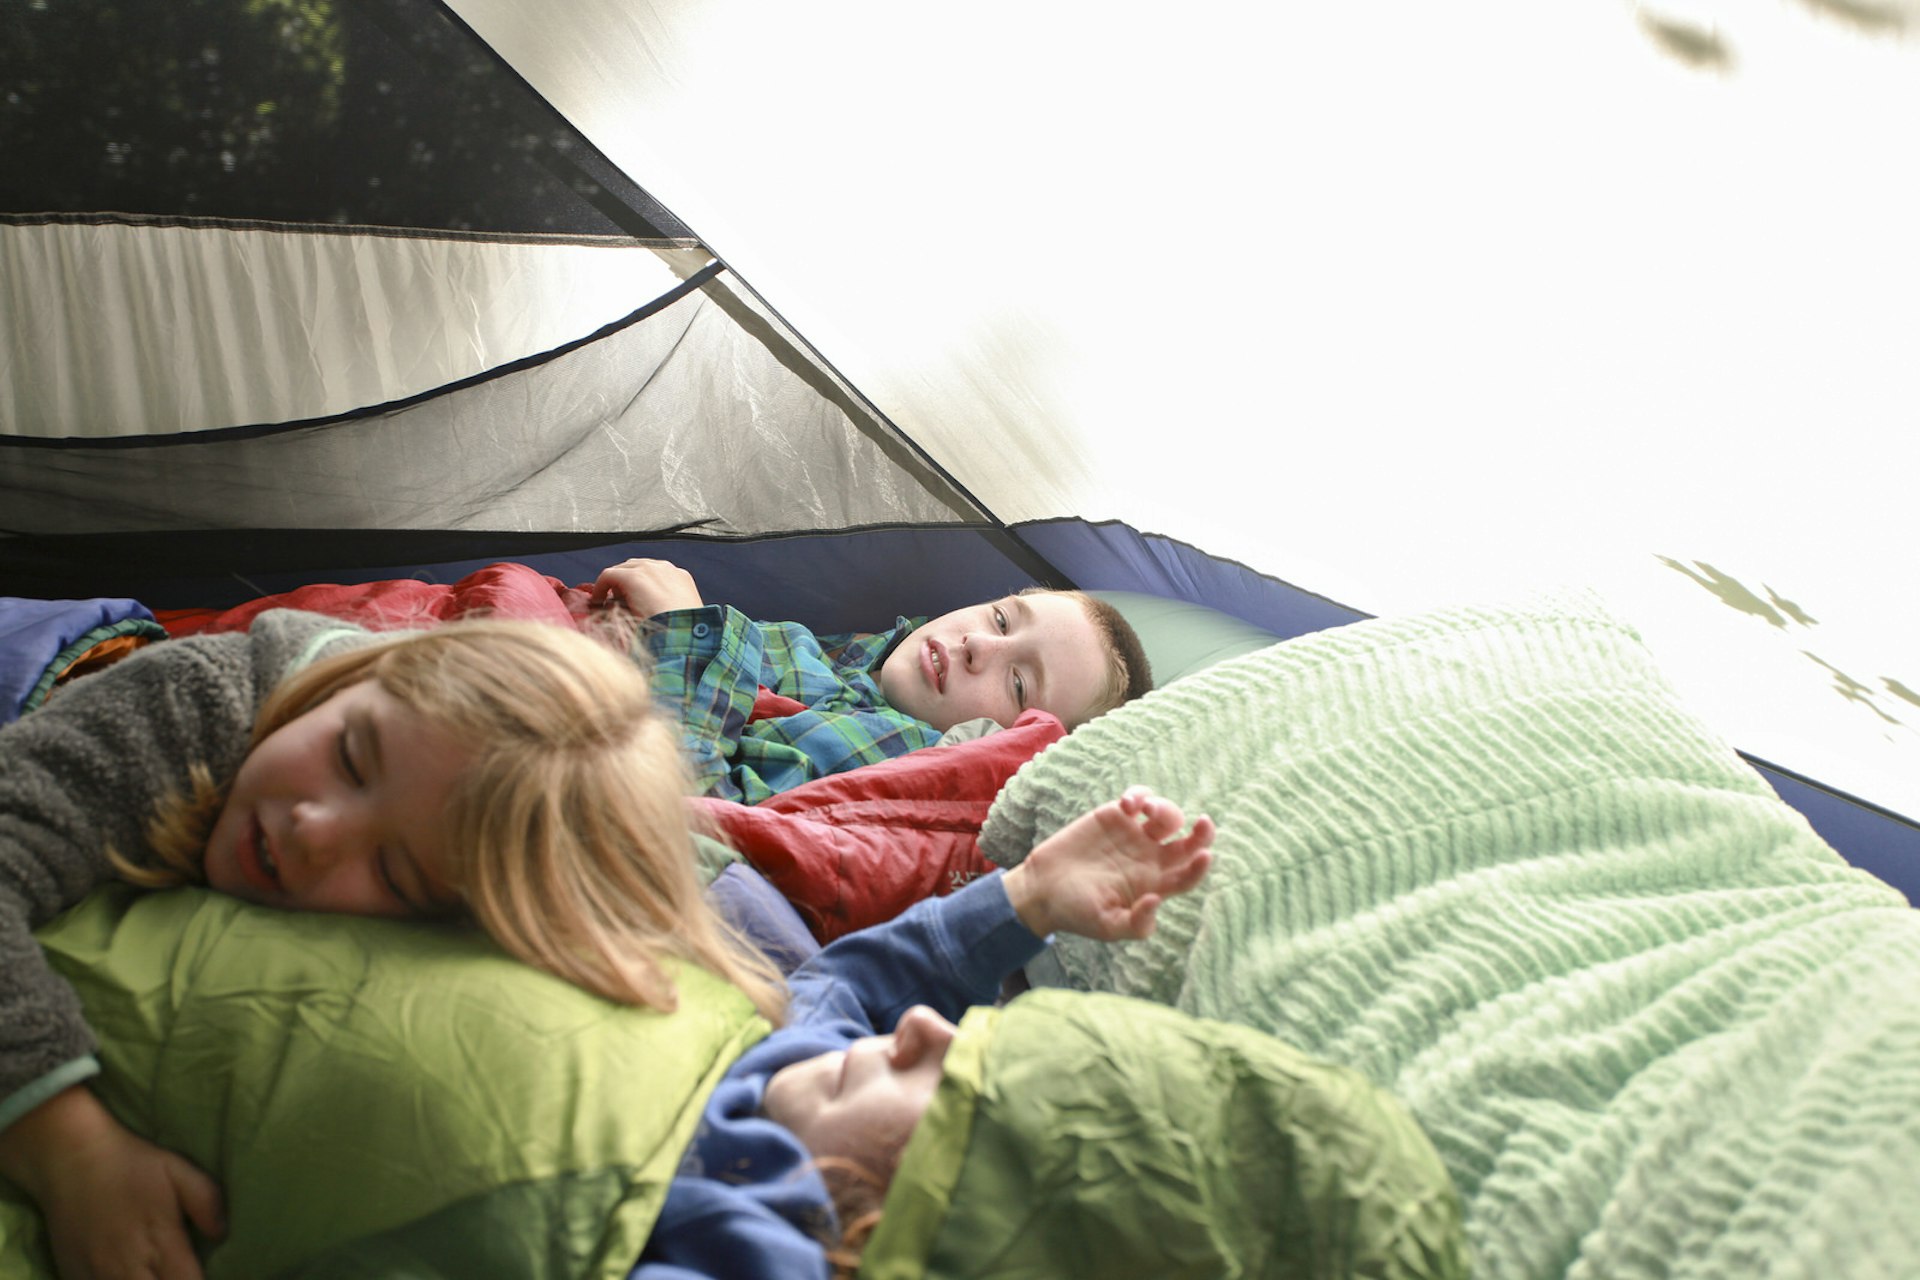 A family of three sleeping in a tent© Collin Quinn Lomax / Shutterstock